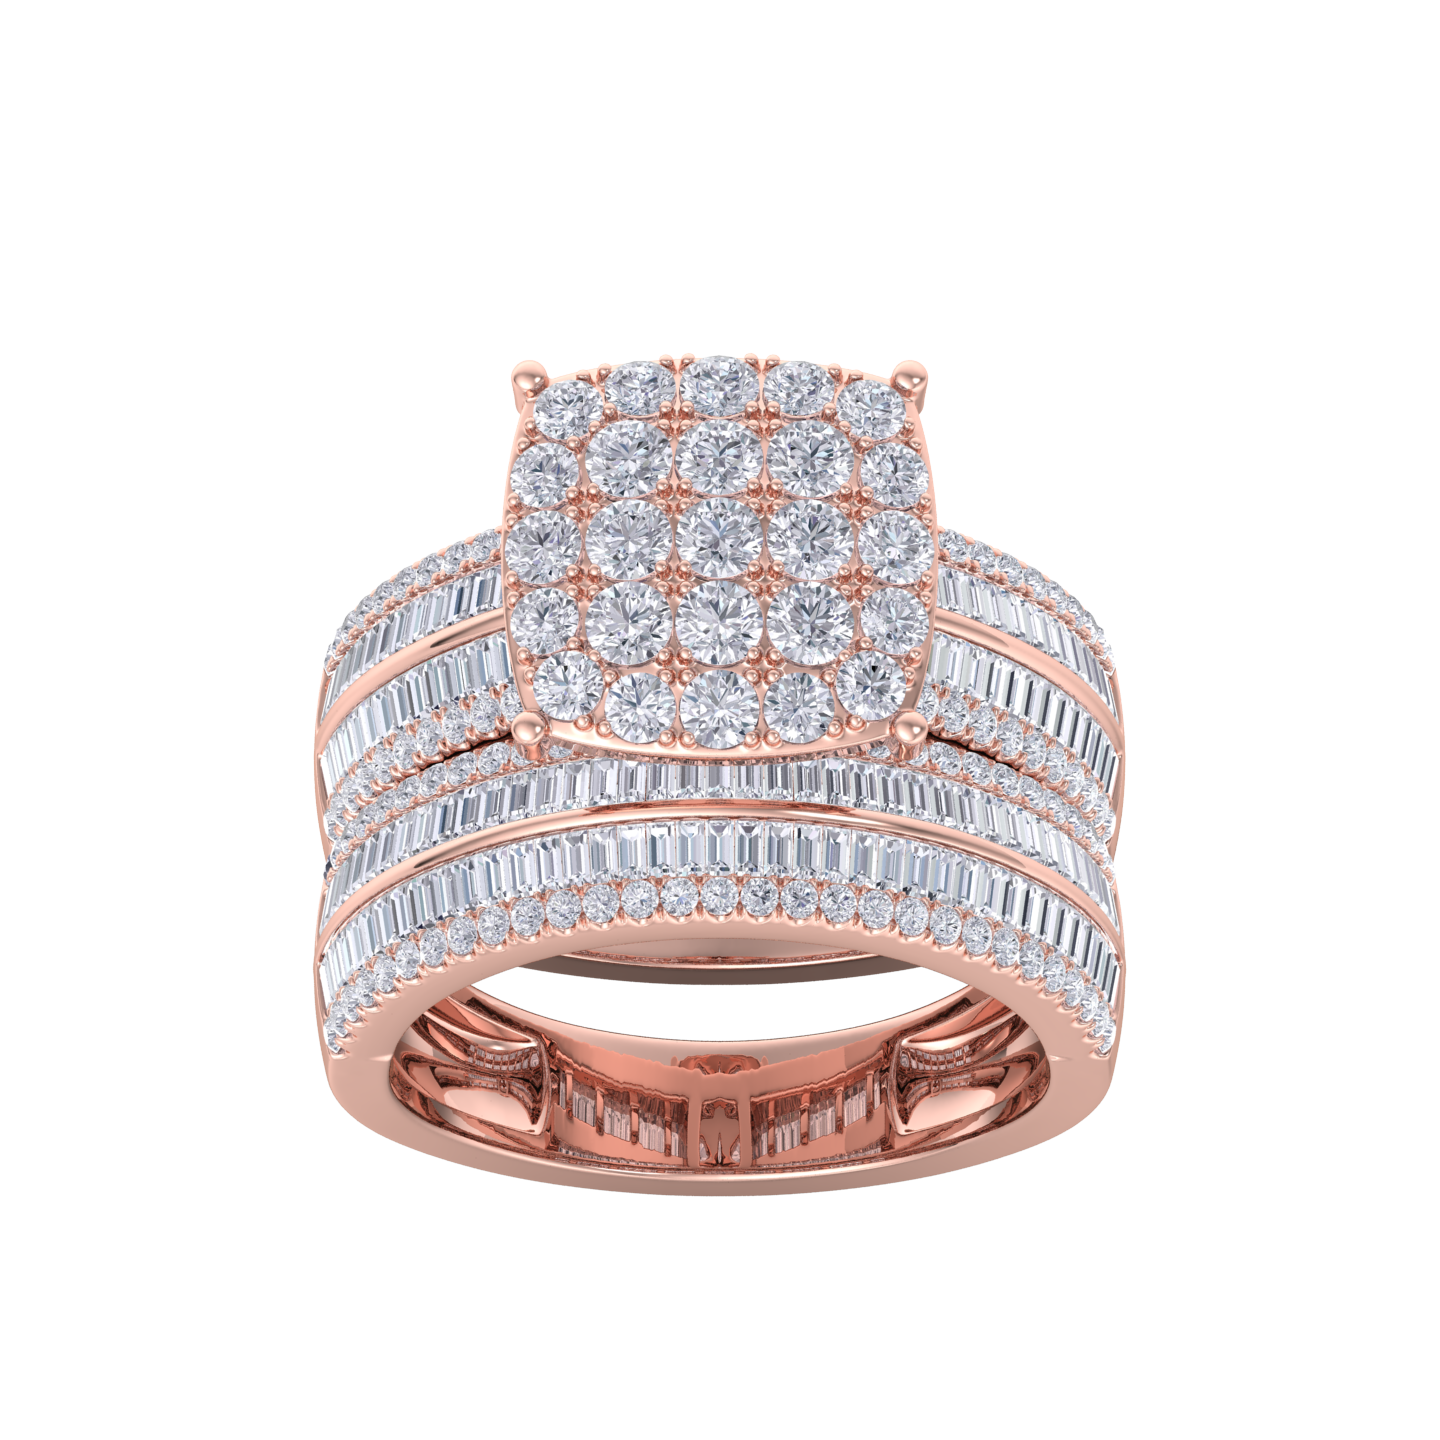 Diamond ring in rose gold with white diamonds of 2.63 ct in weight